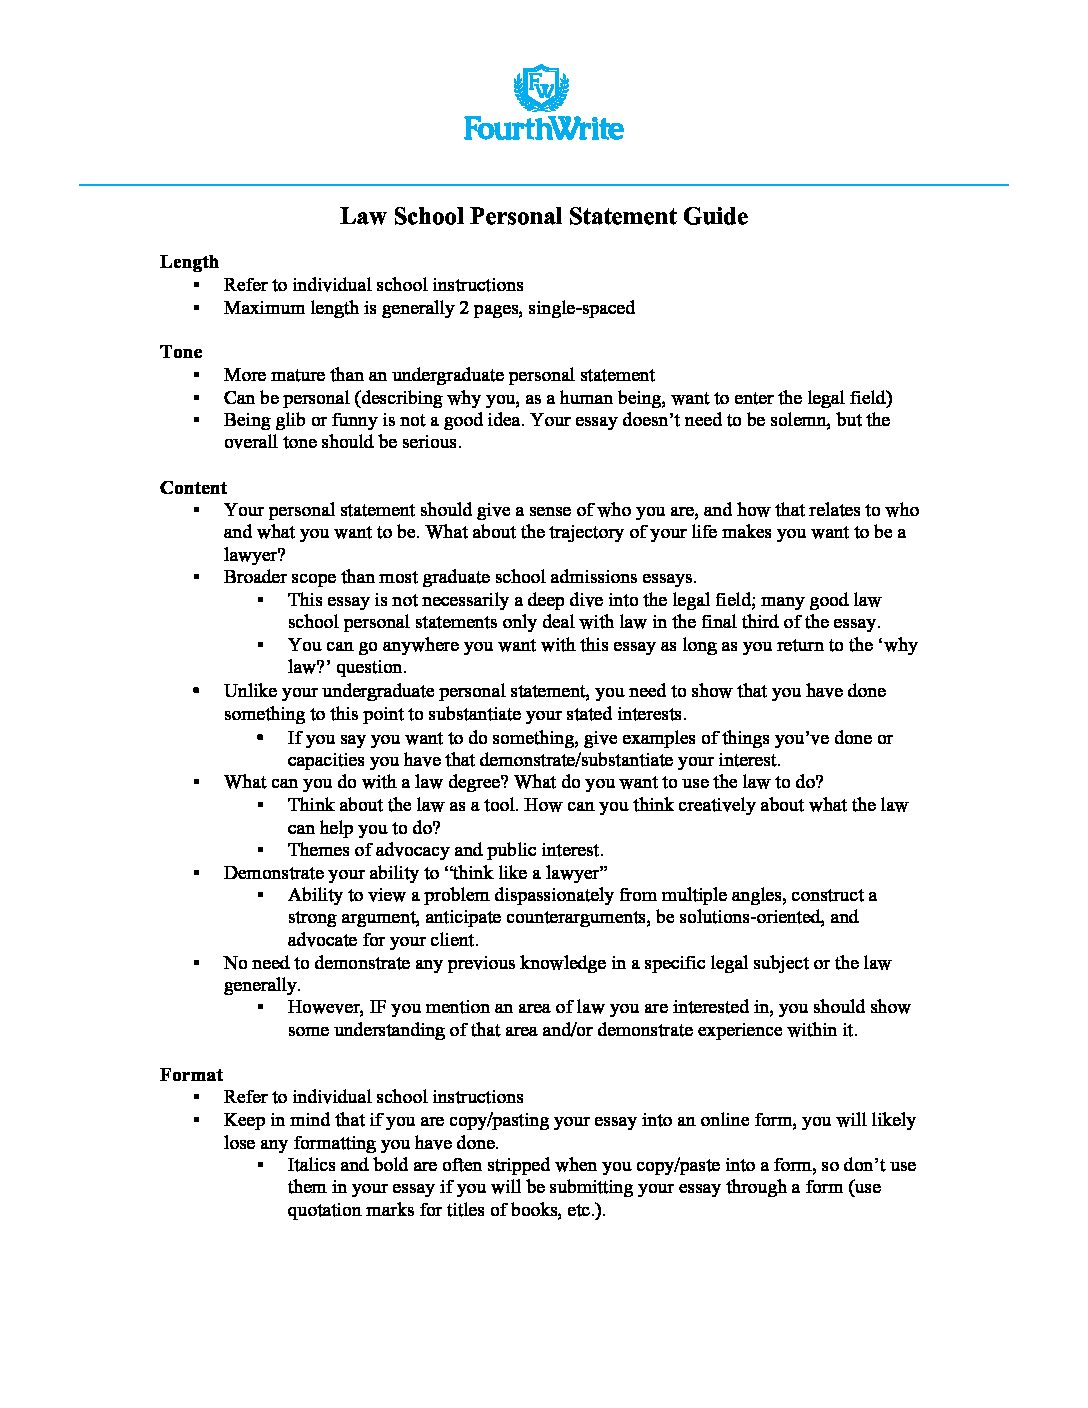 law school personal statement layout